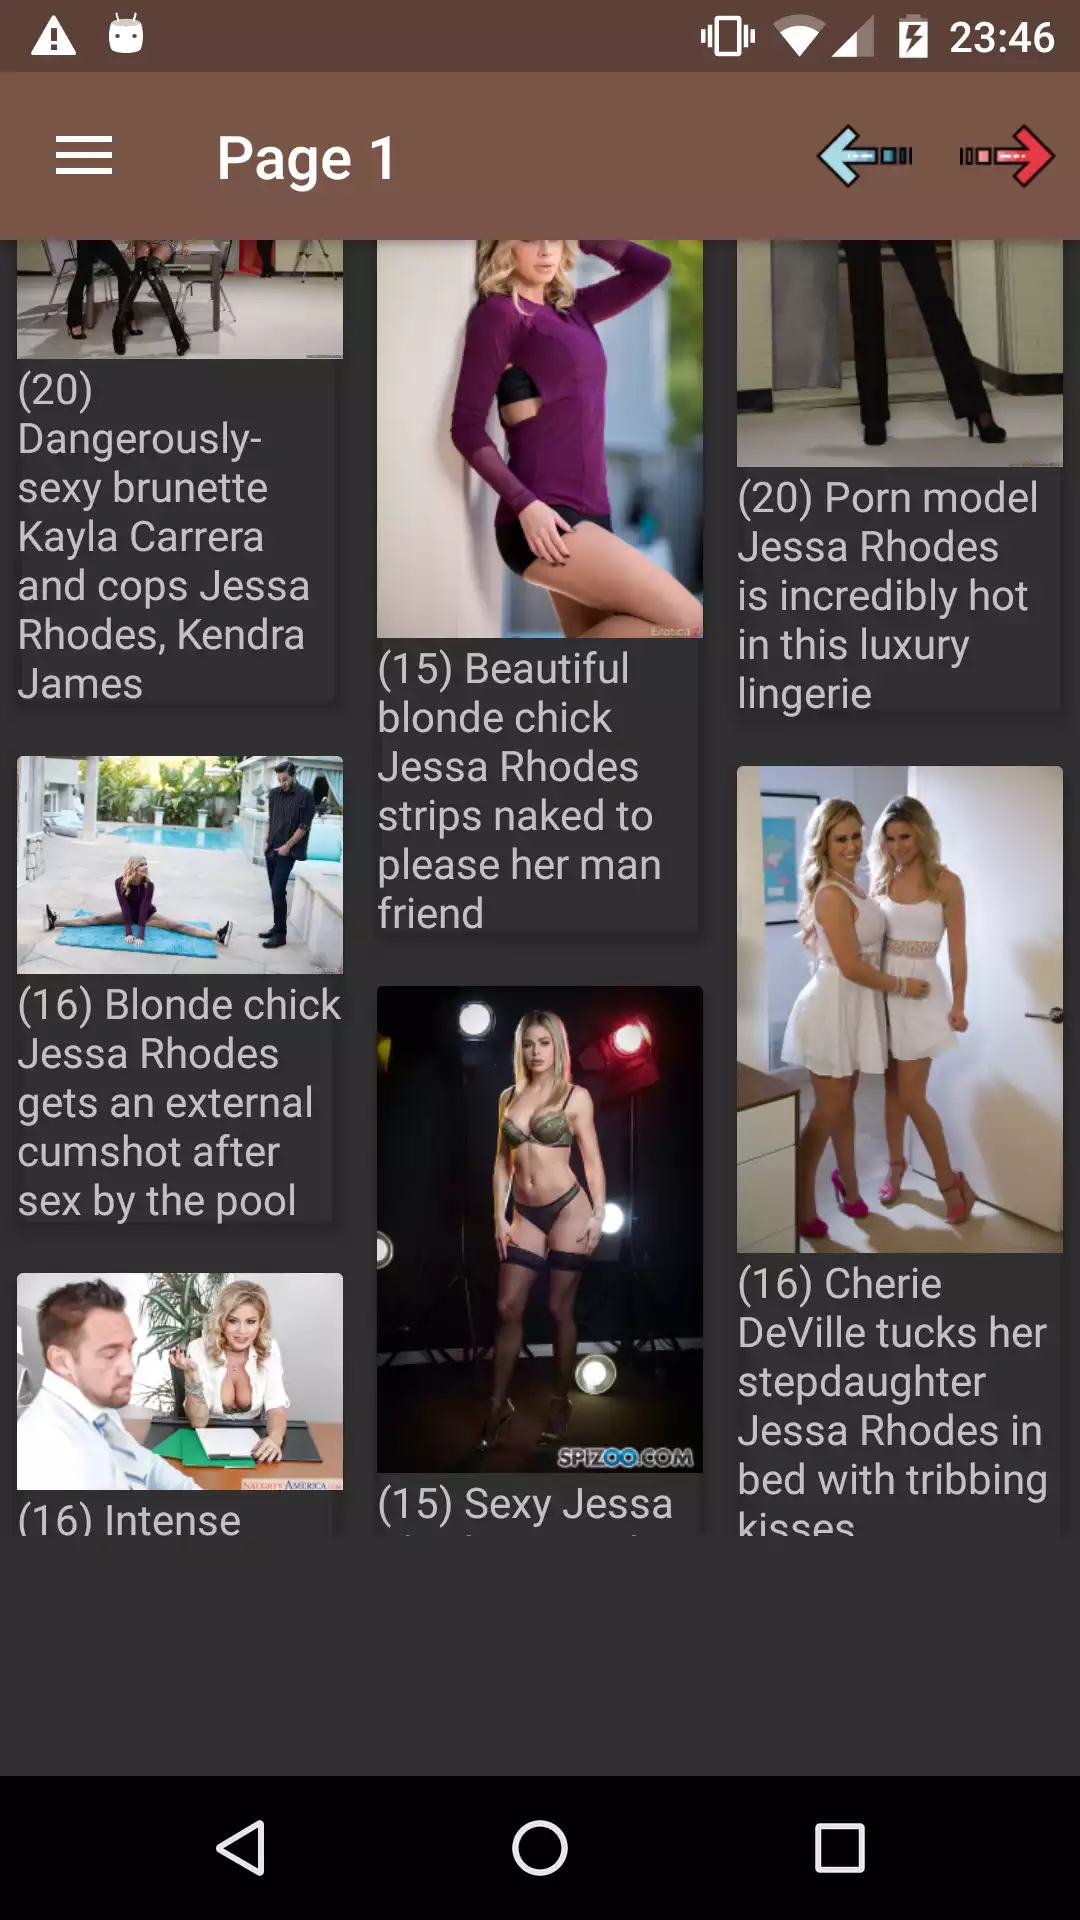 Jessa Rhodes sexy,femboy,images,pics,latest,apk,henta,download,pict,pornstar,nude,porn,gay,hentai,baixar,android,picture,pornstars,galleries,for,hot,apps